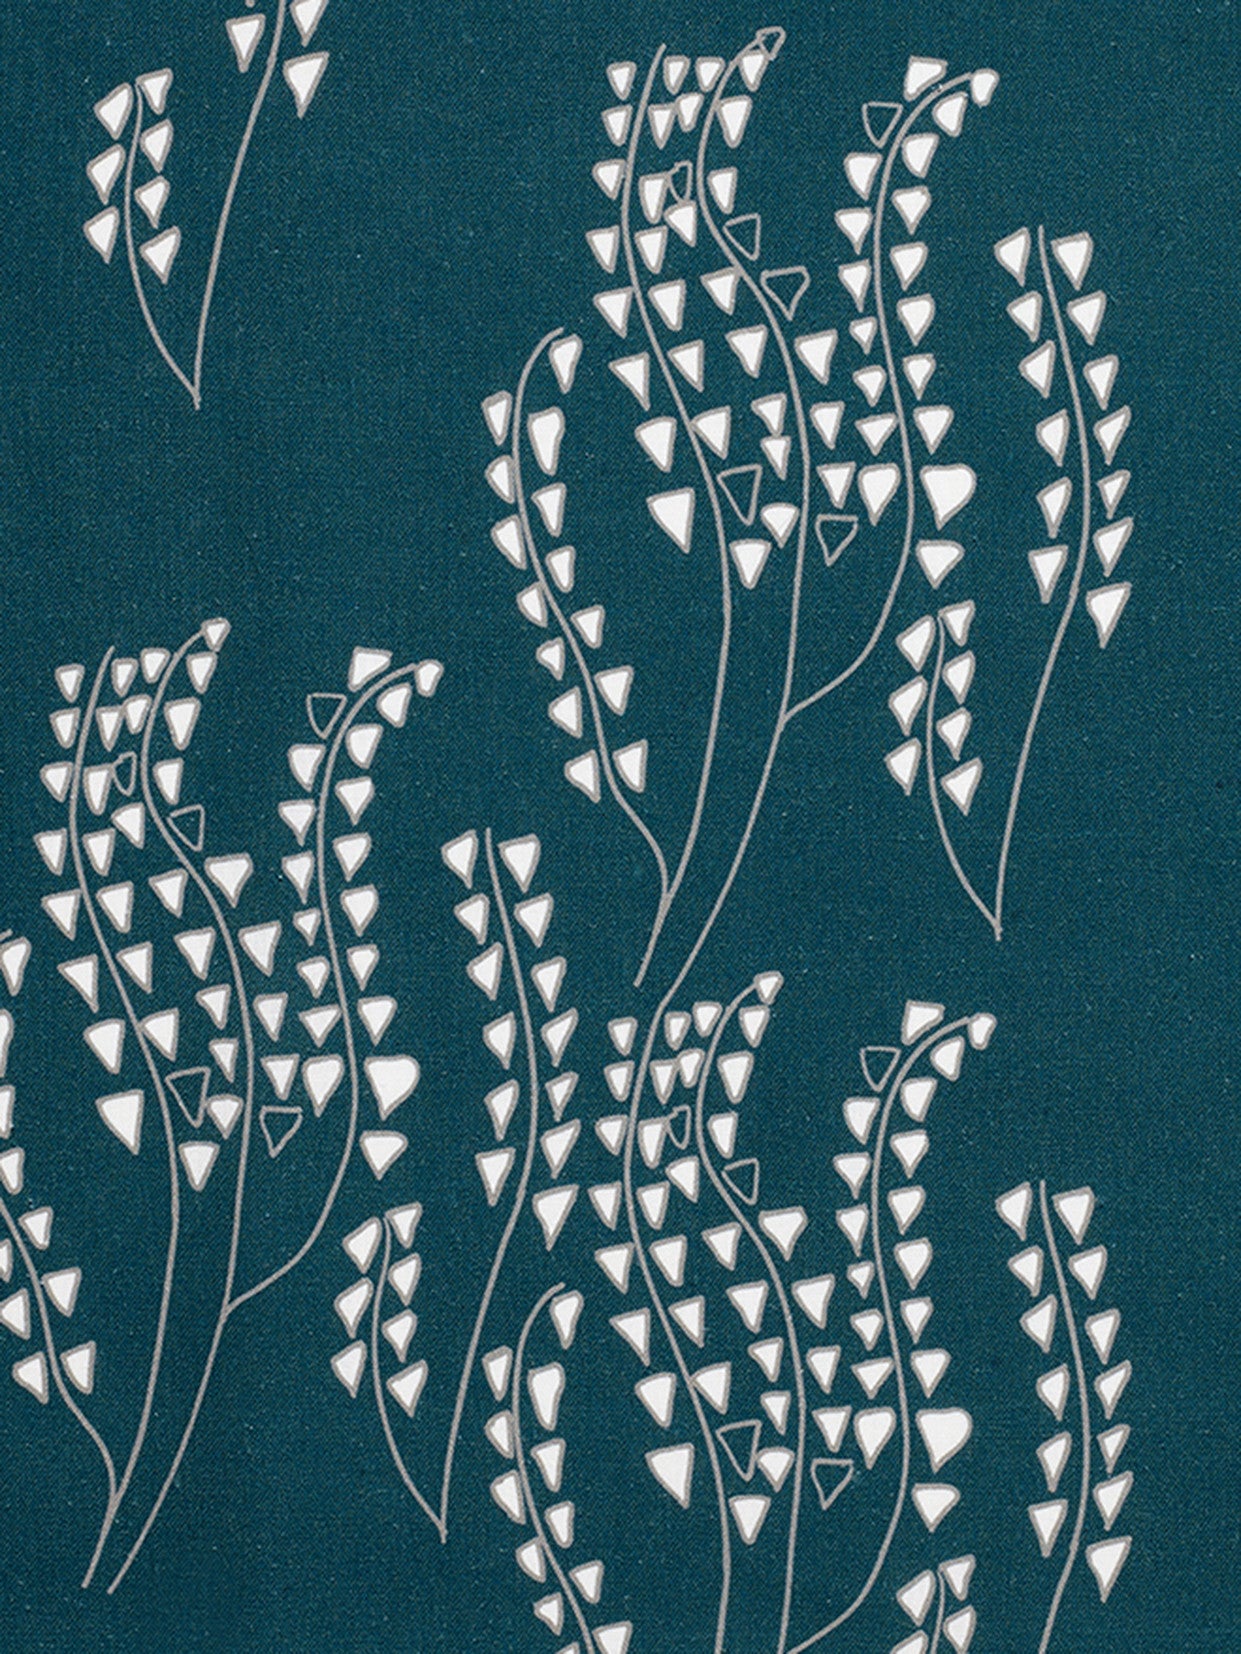 Yuma Graphic Grass Pattern Linen Cotton Canvas Home Interiors Decor Fabric by the yard or meter for curtain, blinds or upholstery - Dark Petrol Blue (navy)/Grey - ships from Canada (USA)